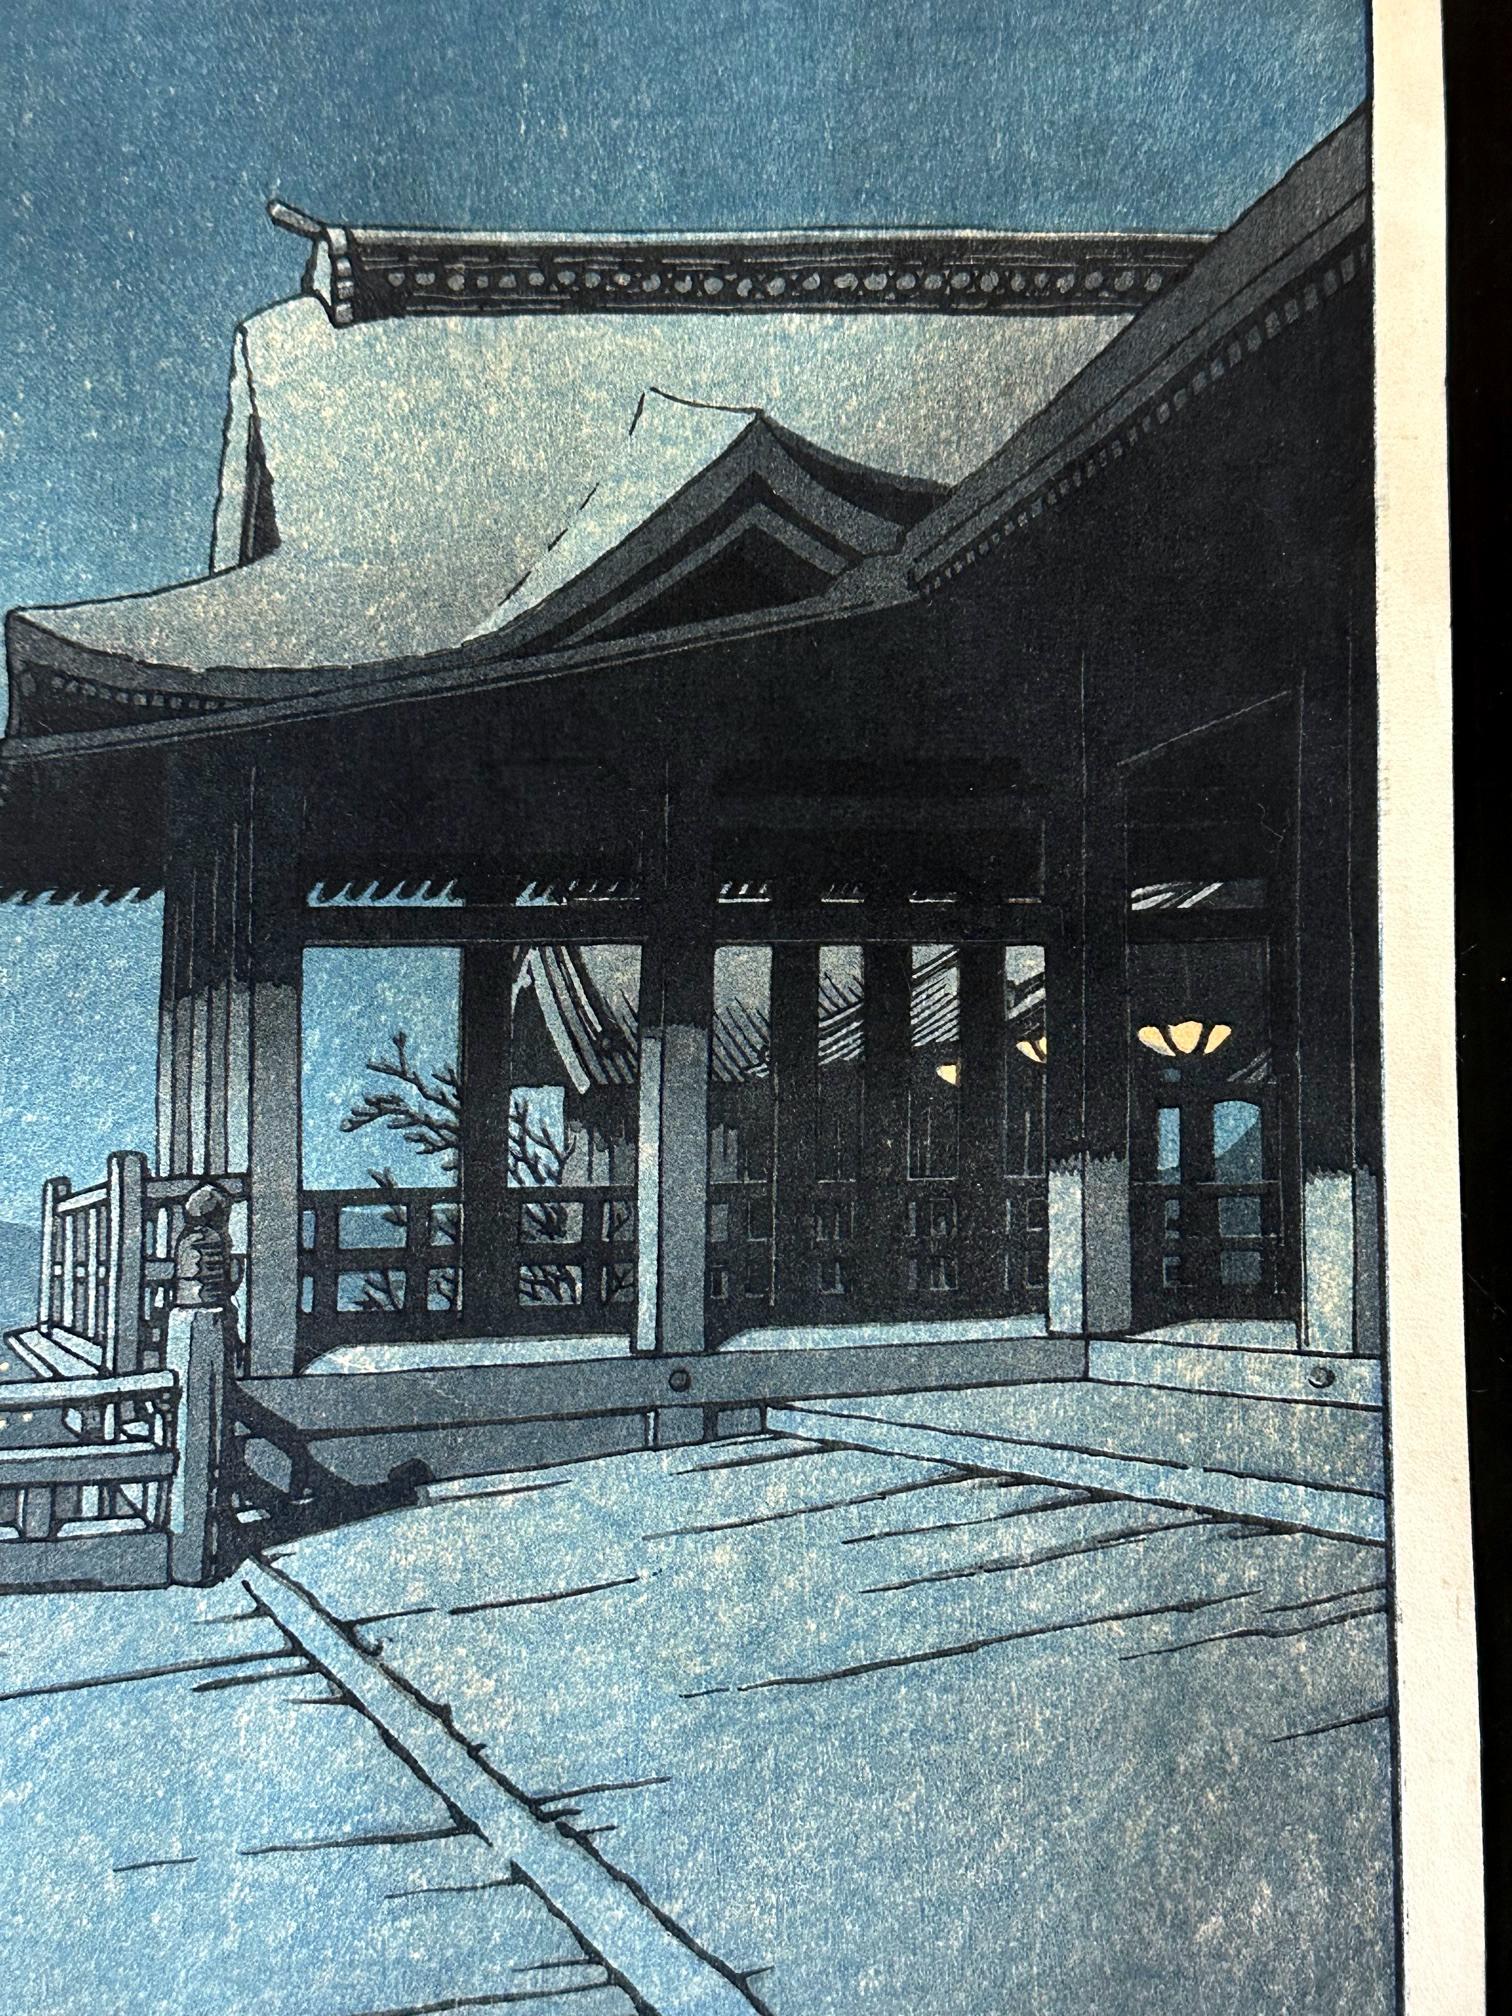 Paper Early Japanese Woodblock Print Kiyomizu-dera Temple in Kyoto by Kawase Hasui For Sale